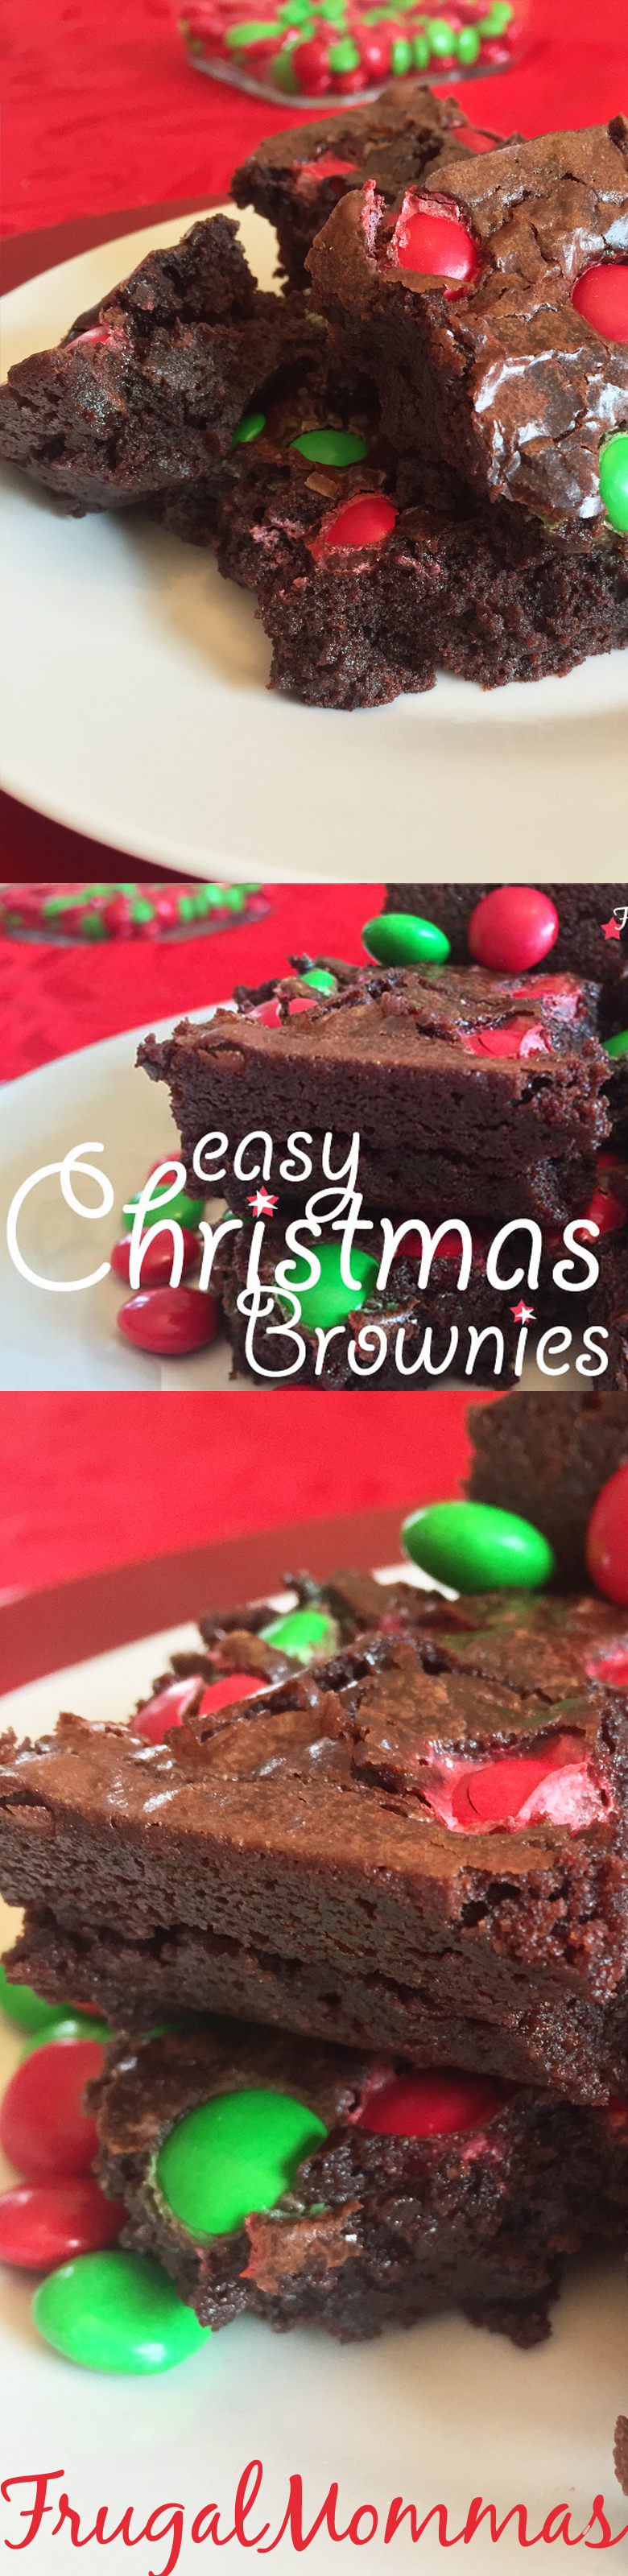 easy brownies with M&M's®